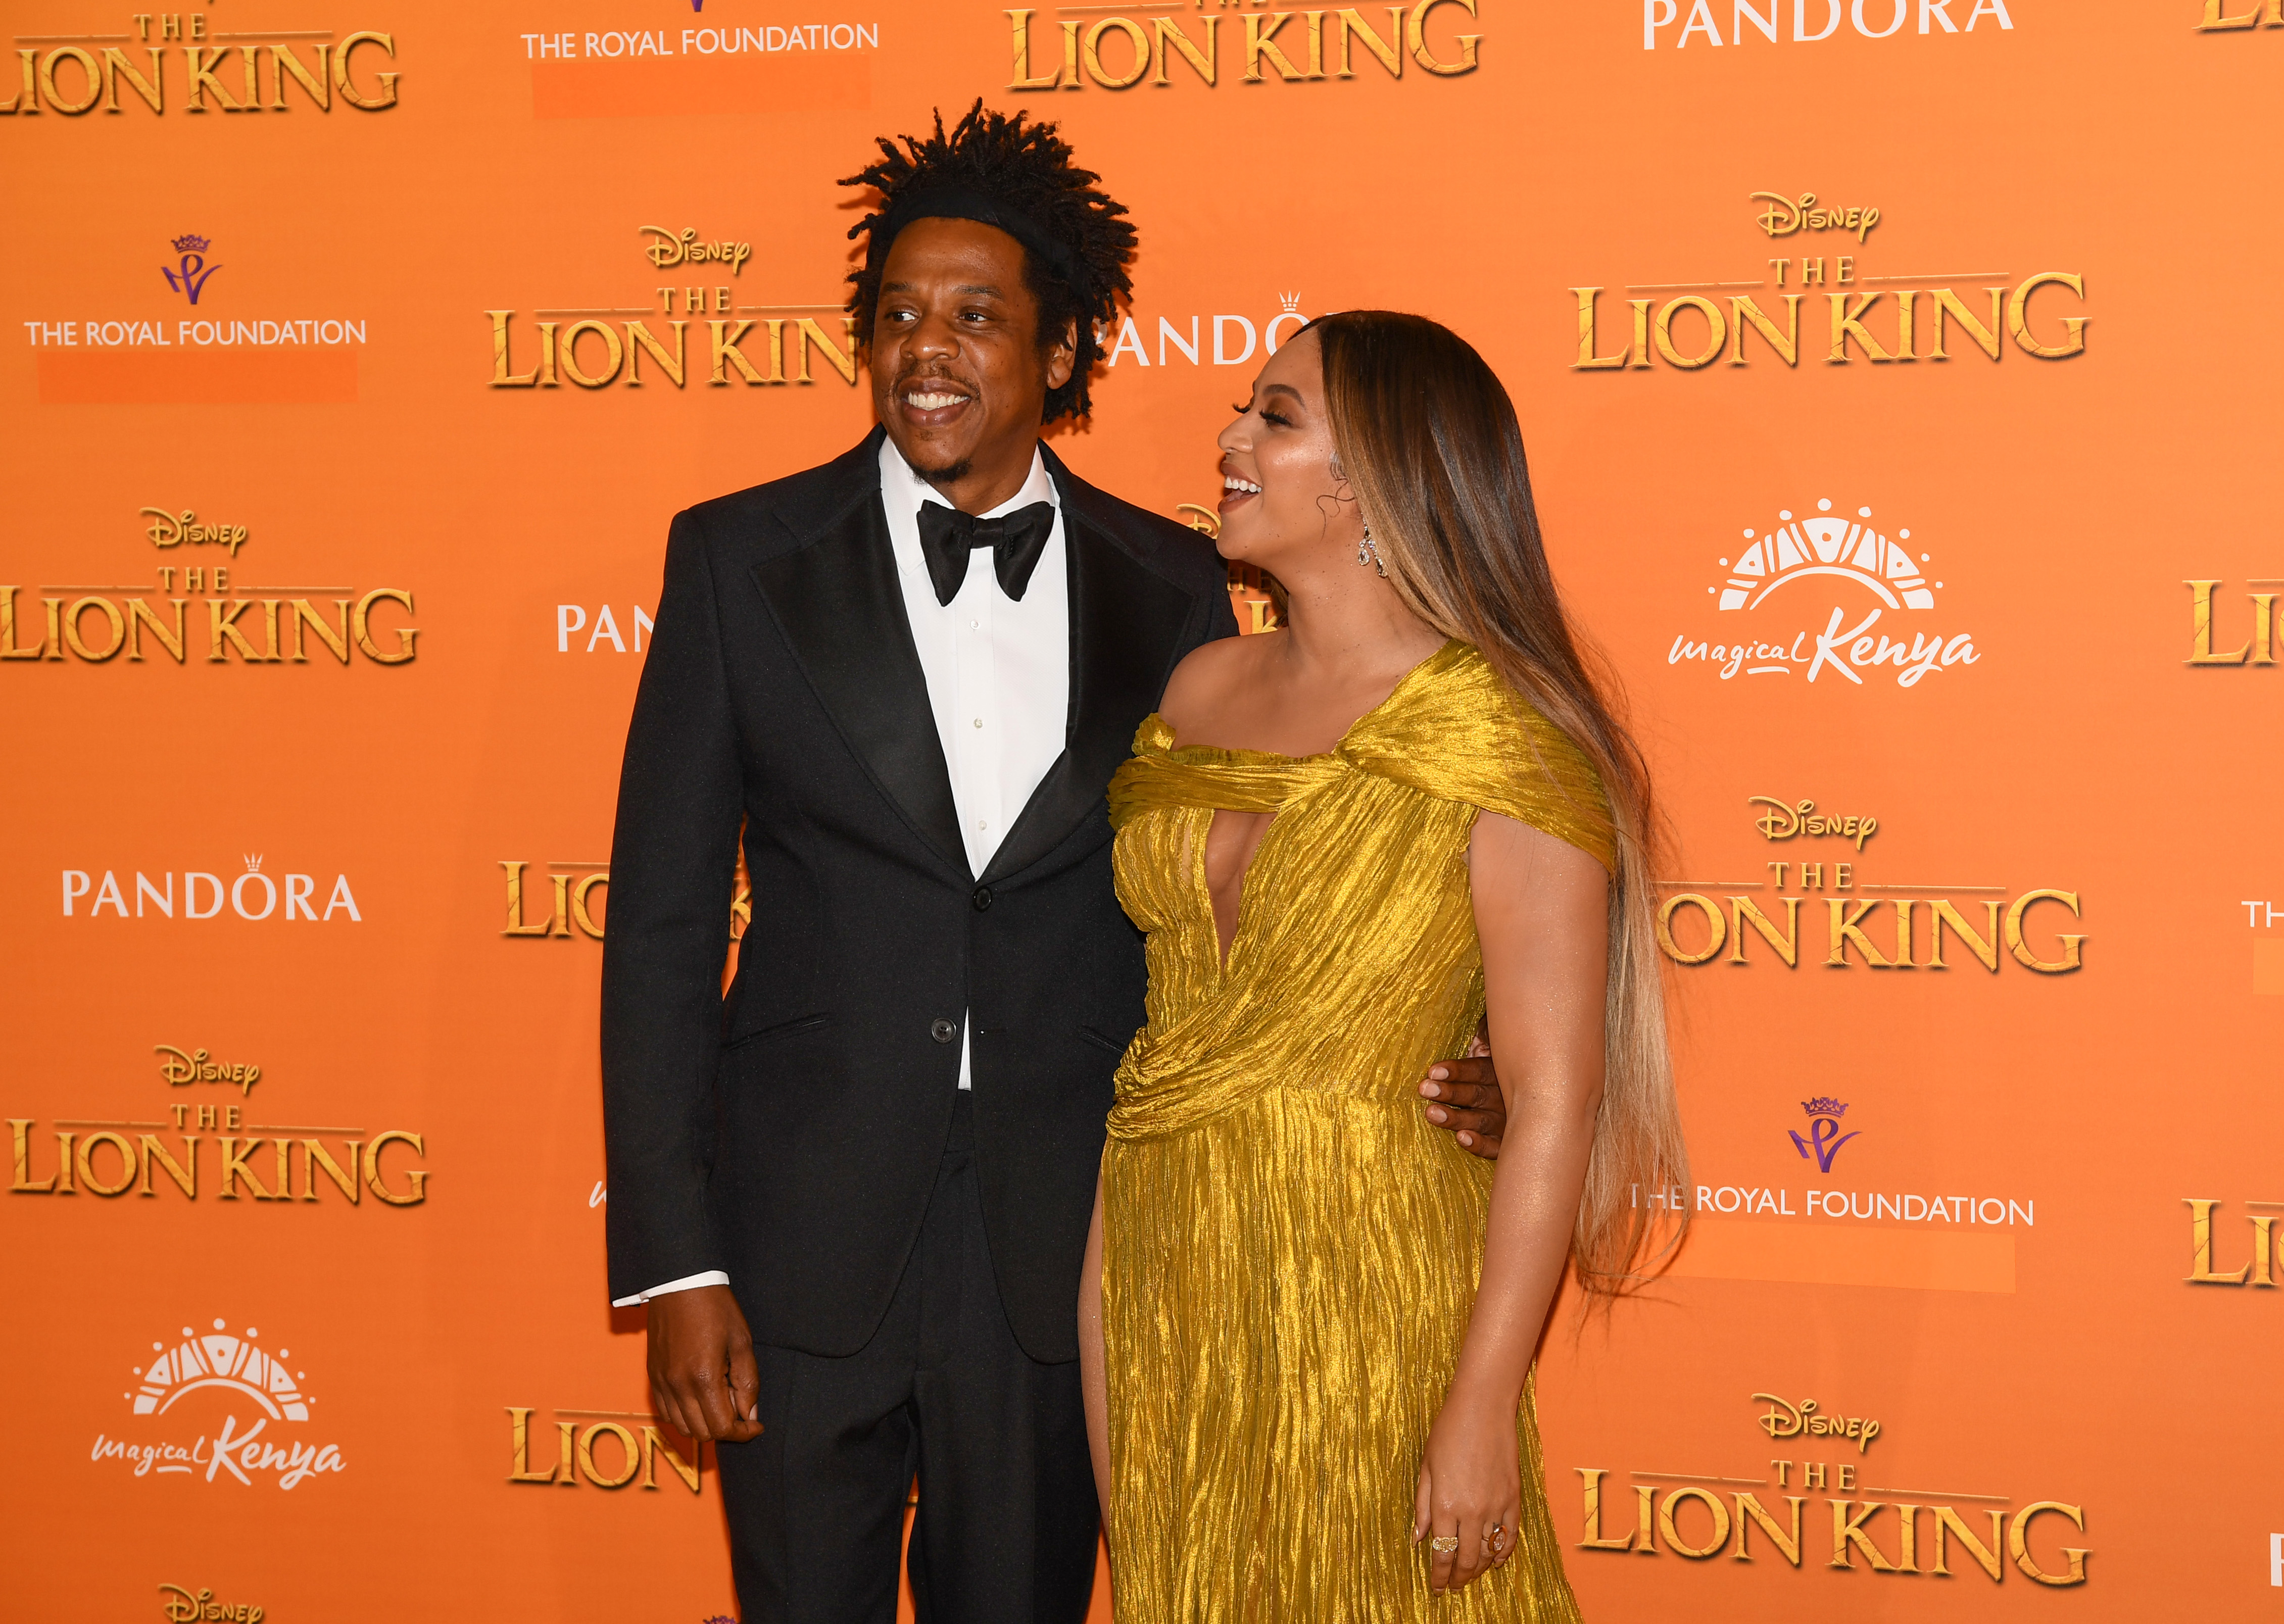 JAY-Z and Beyoncé Bring Ace of Spades to Golden Globes - The Source